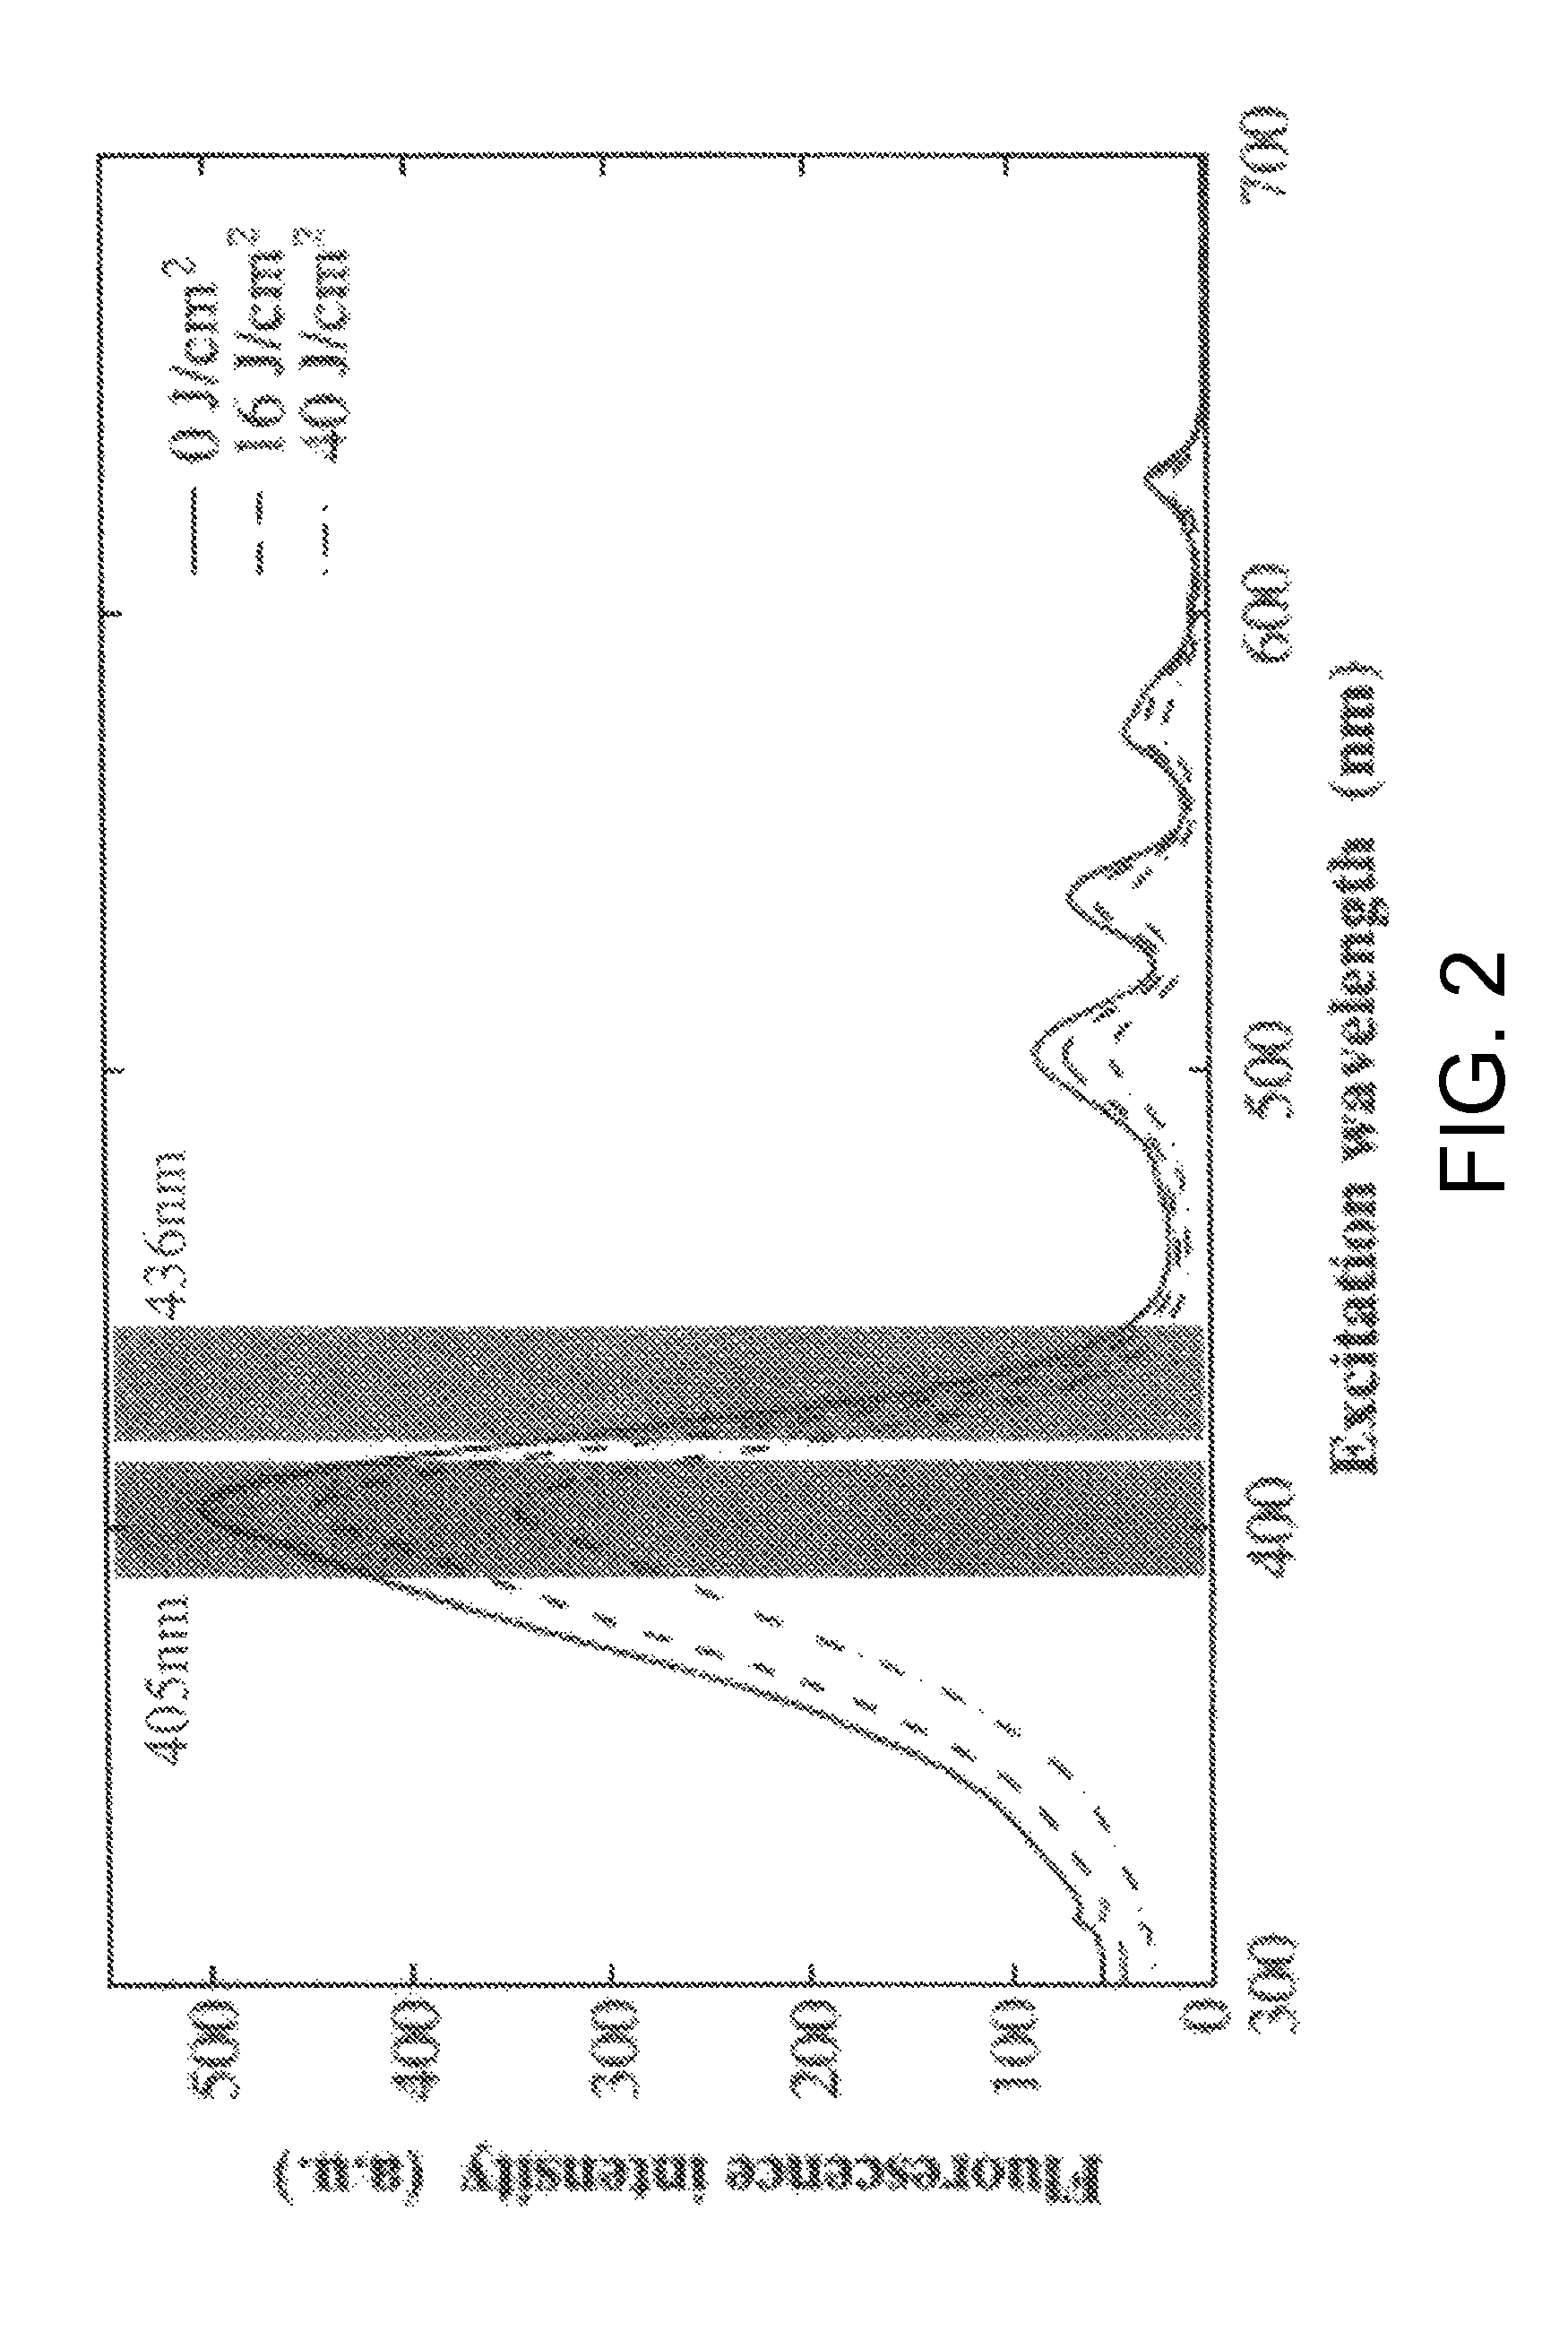 Tumor site or parathyroid gland identification device and method